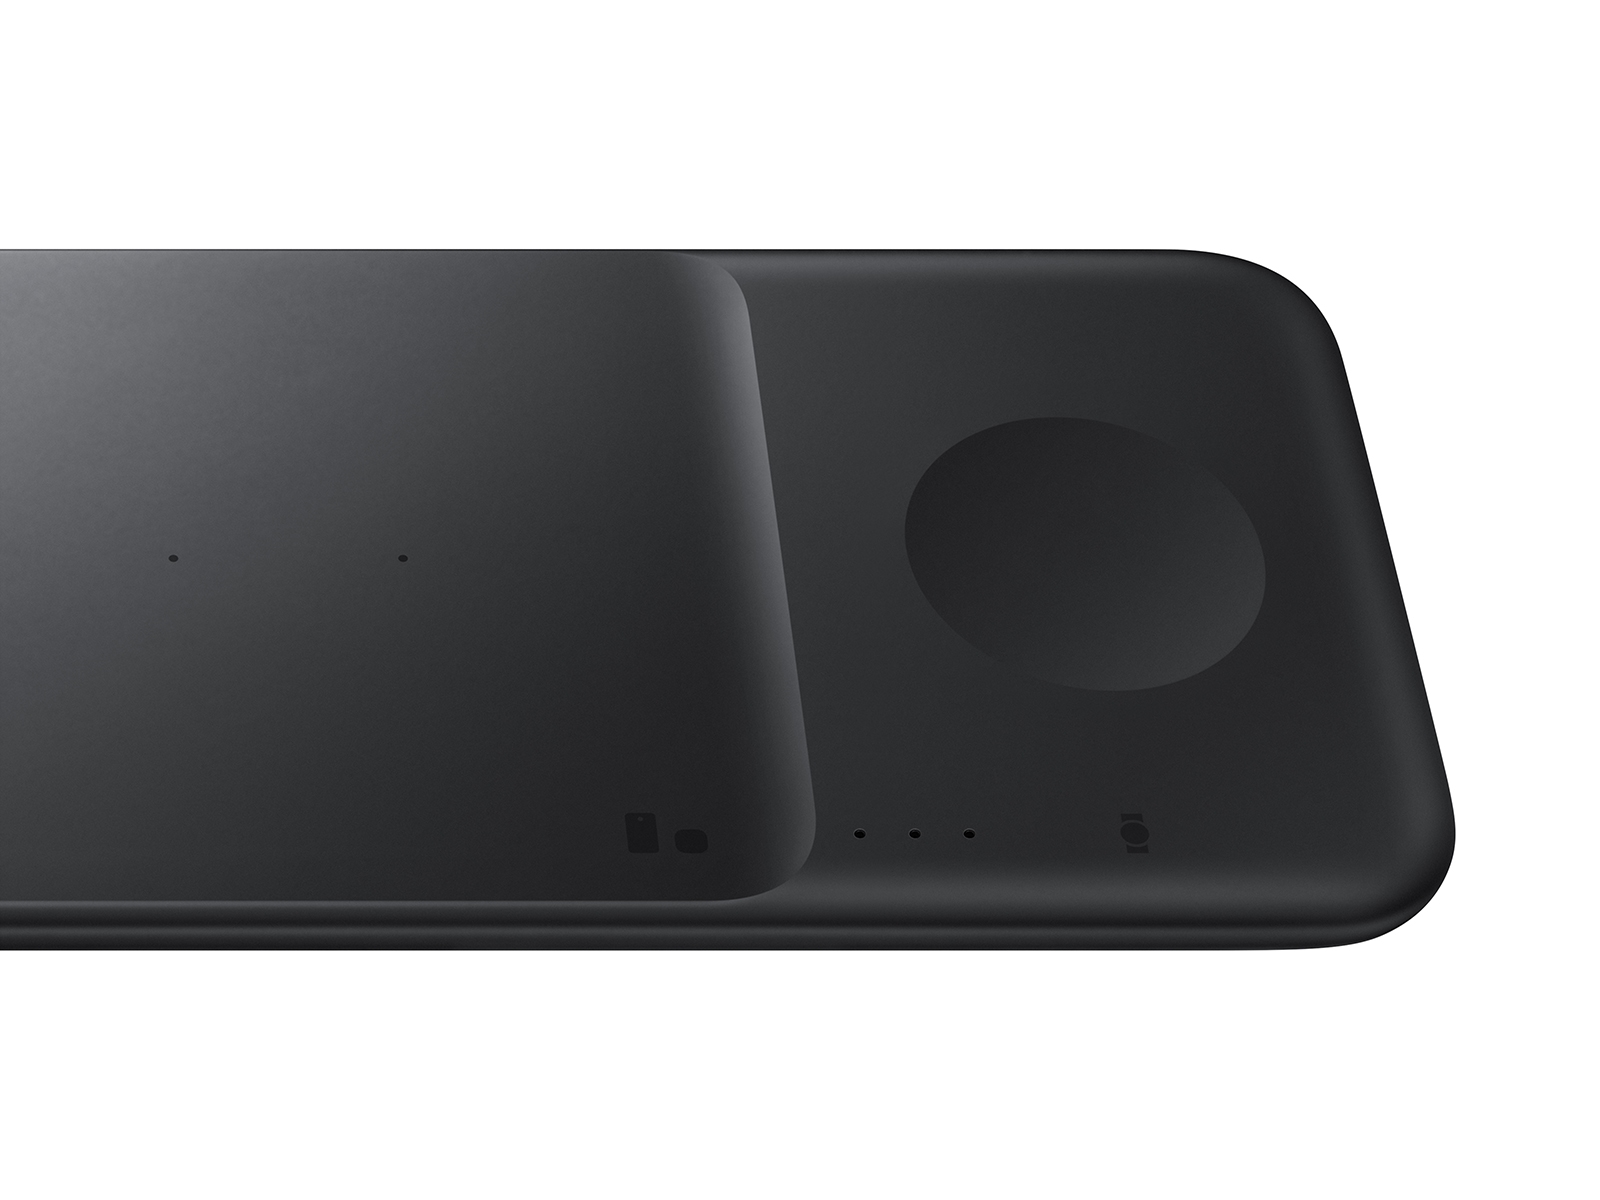 Thumbnail image of Wireless Charger Trio, Black